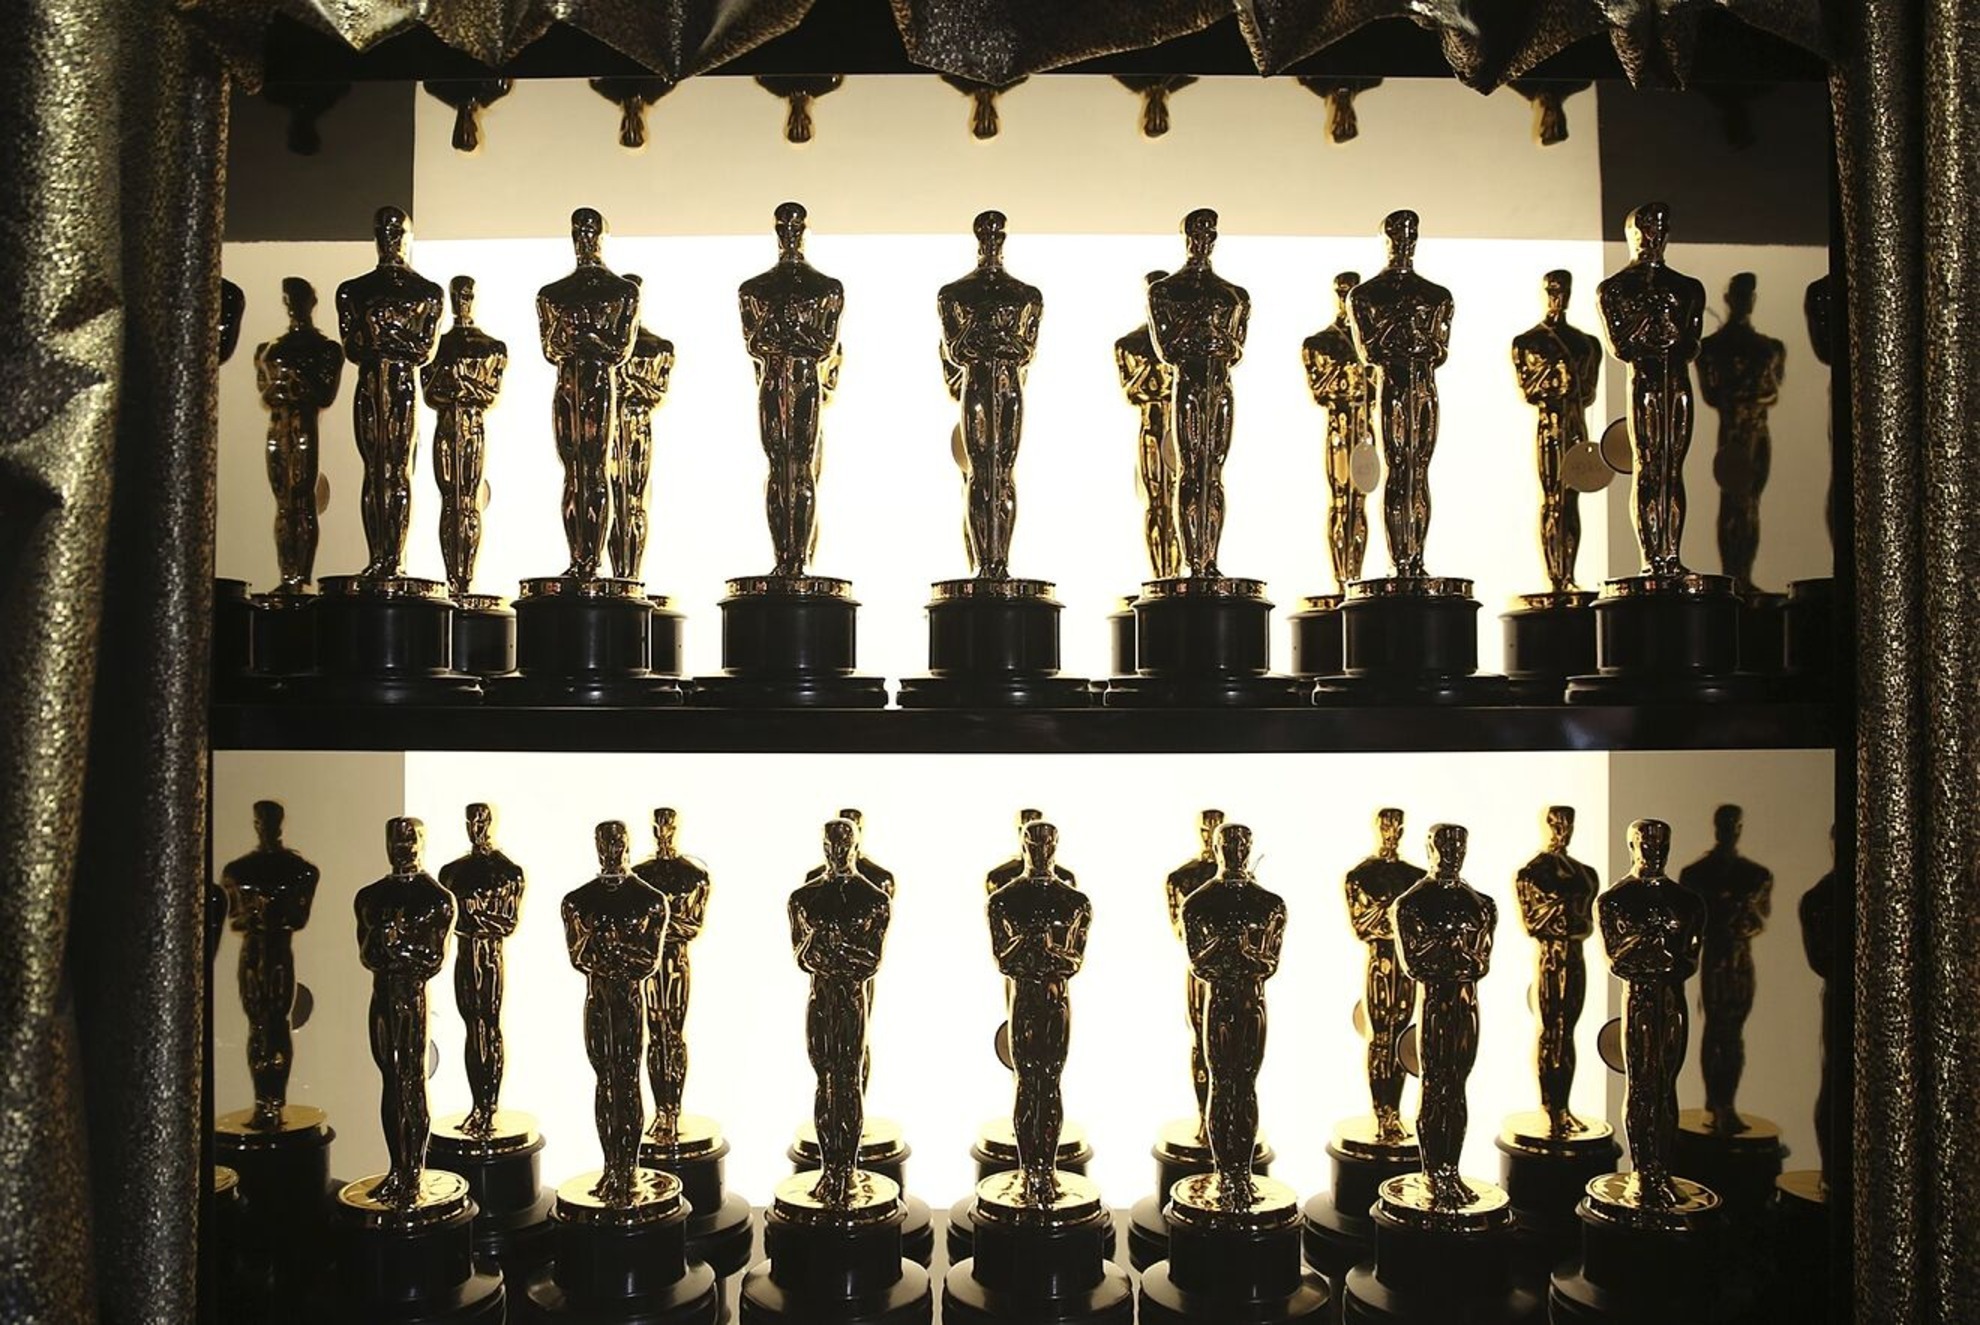 The 96th Oscars will be held this Sunday, March 10.